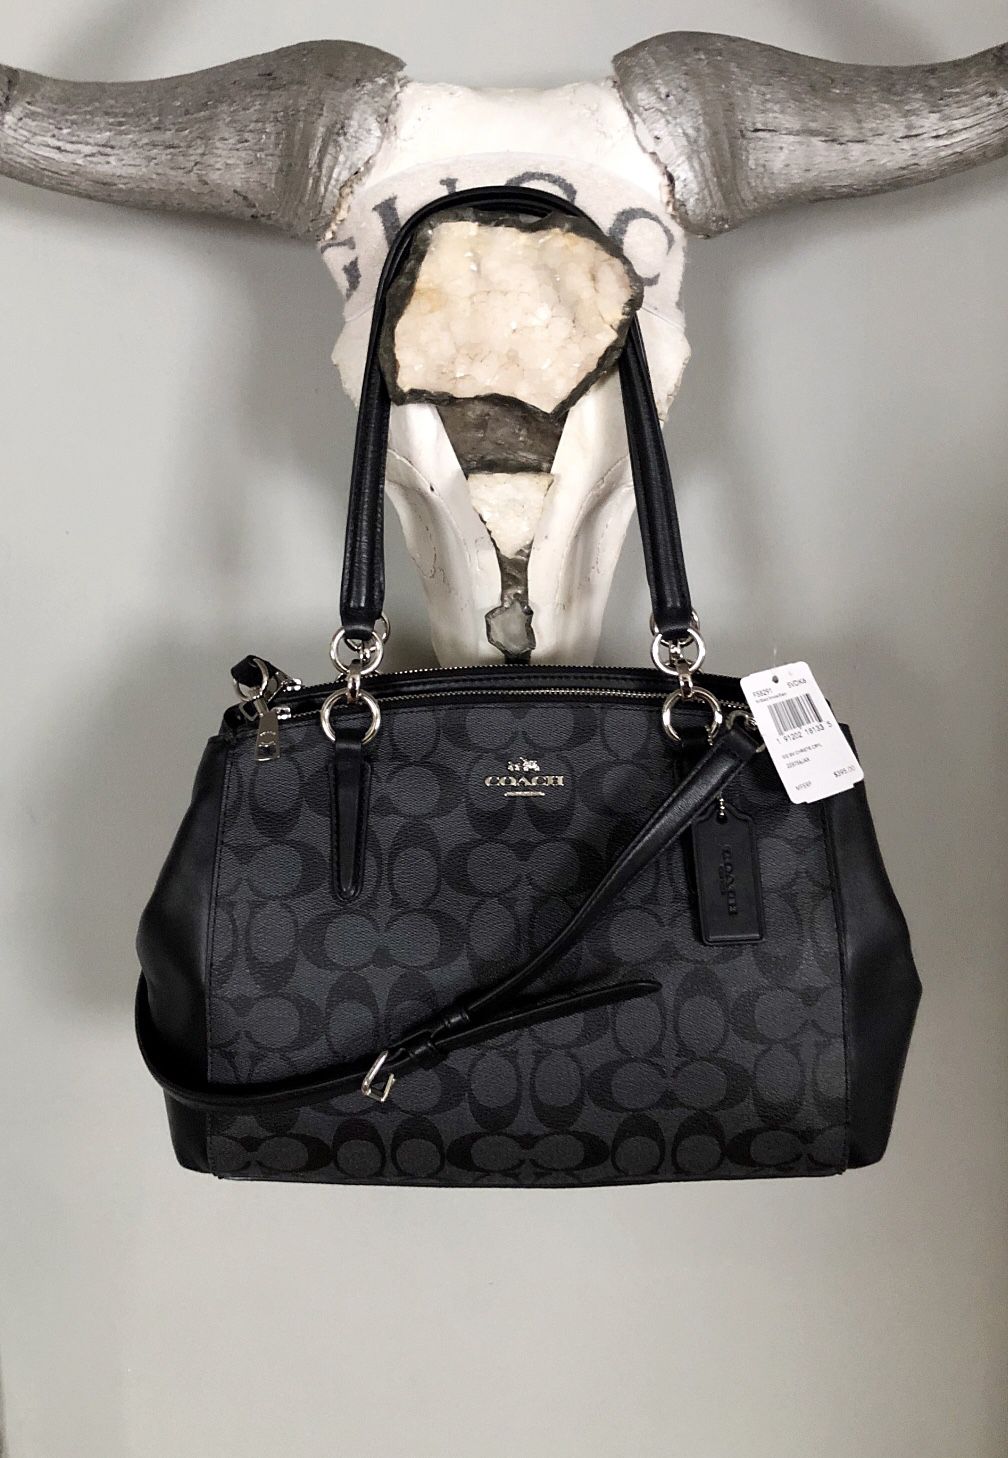 New! Coach Christie Carryall retail $395 Brand new with tags and cards. Two lined outer zippered pockets, with a center open top compartment with cent